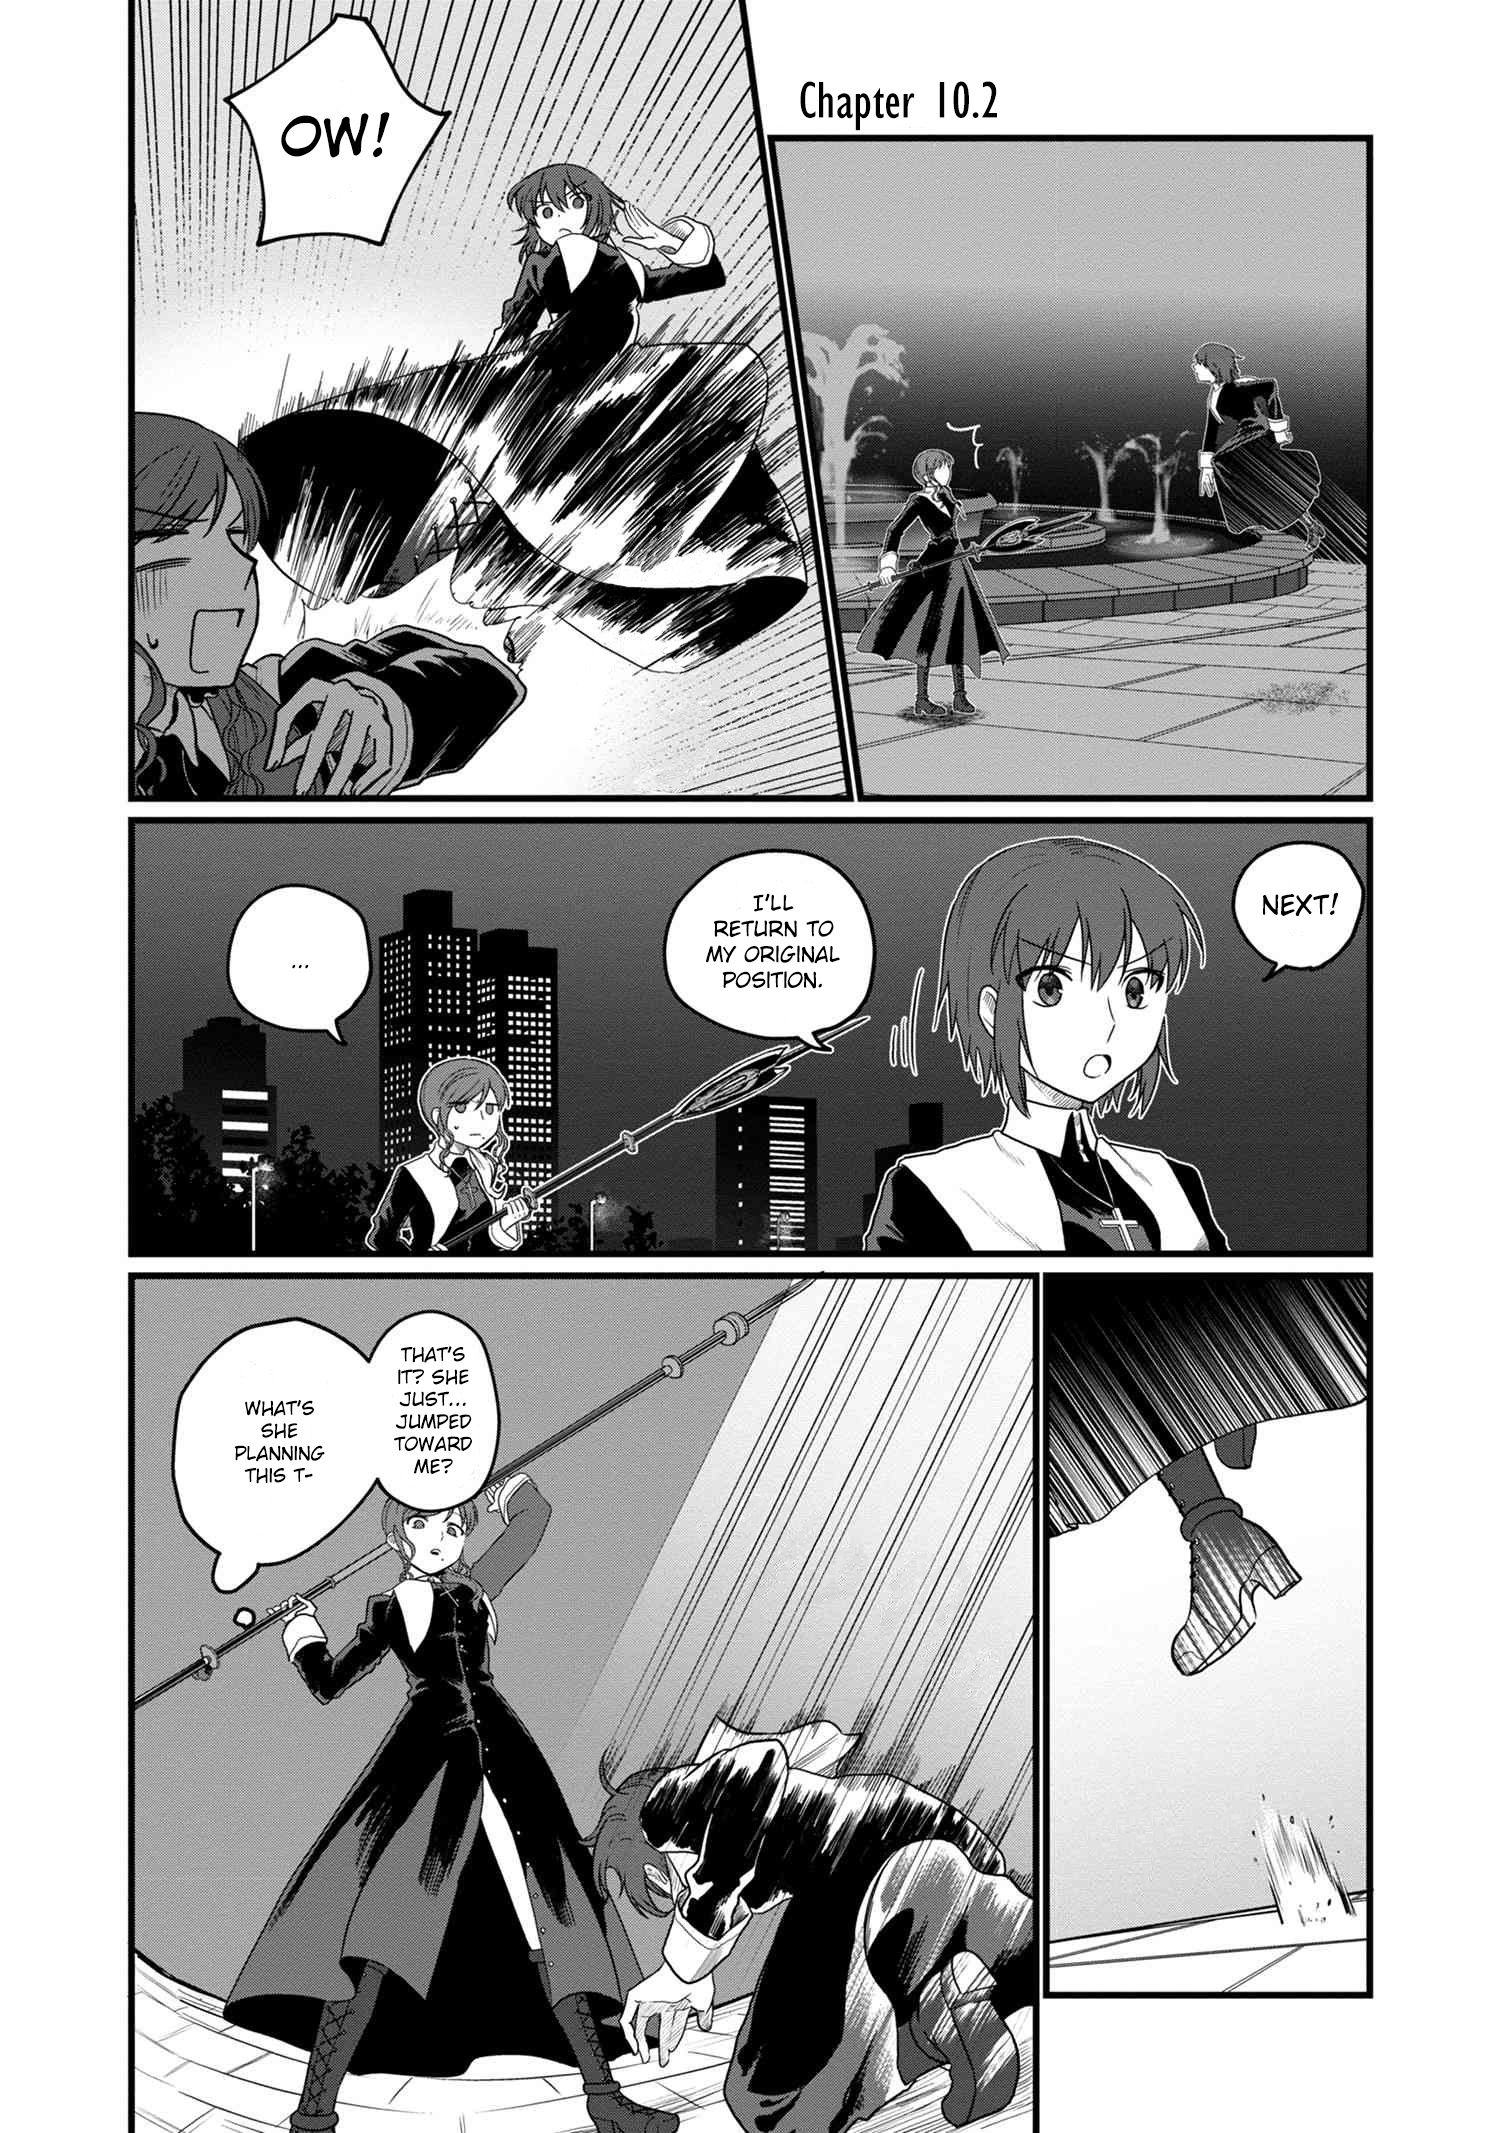 Melty Blood: Type Lumina Piece In Paradise - Page 1